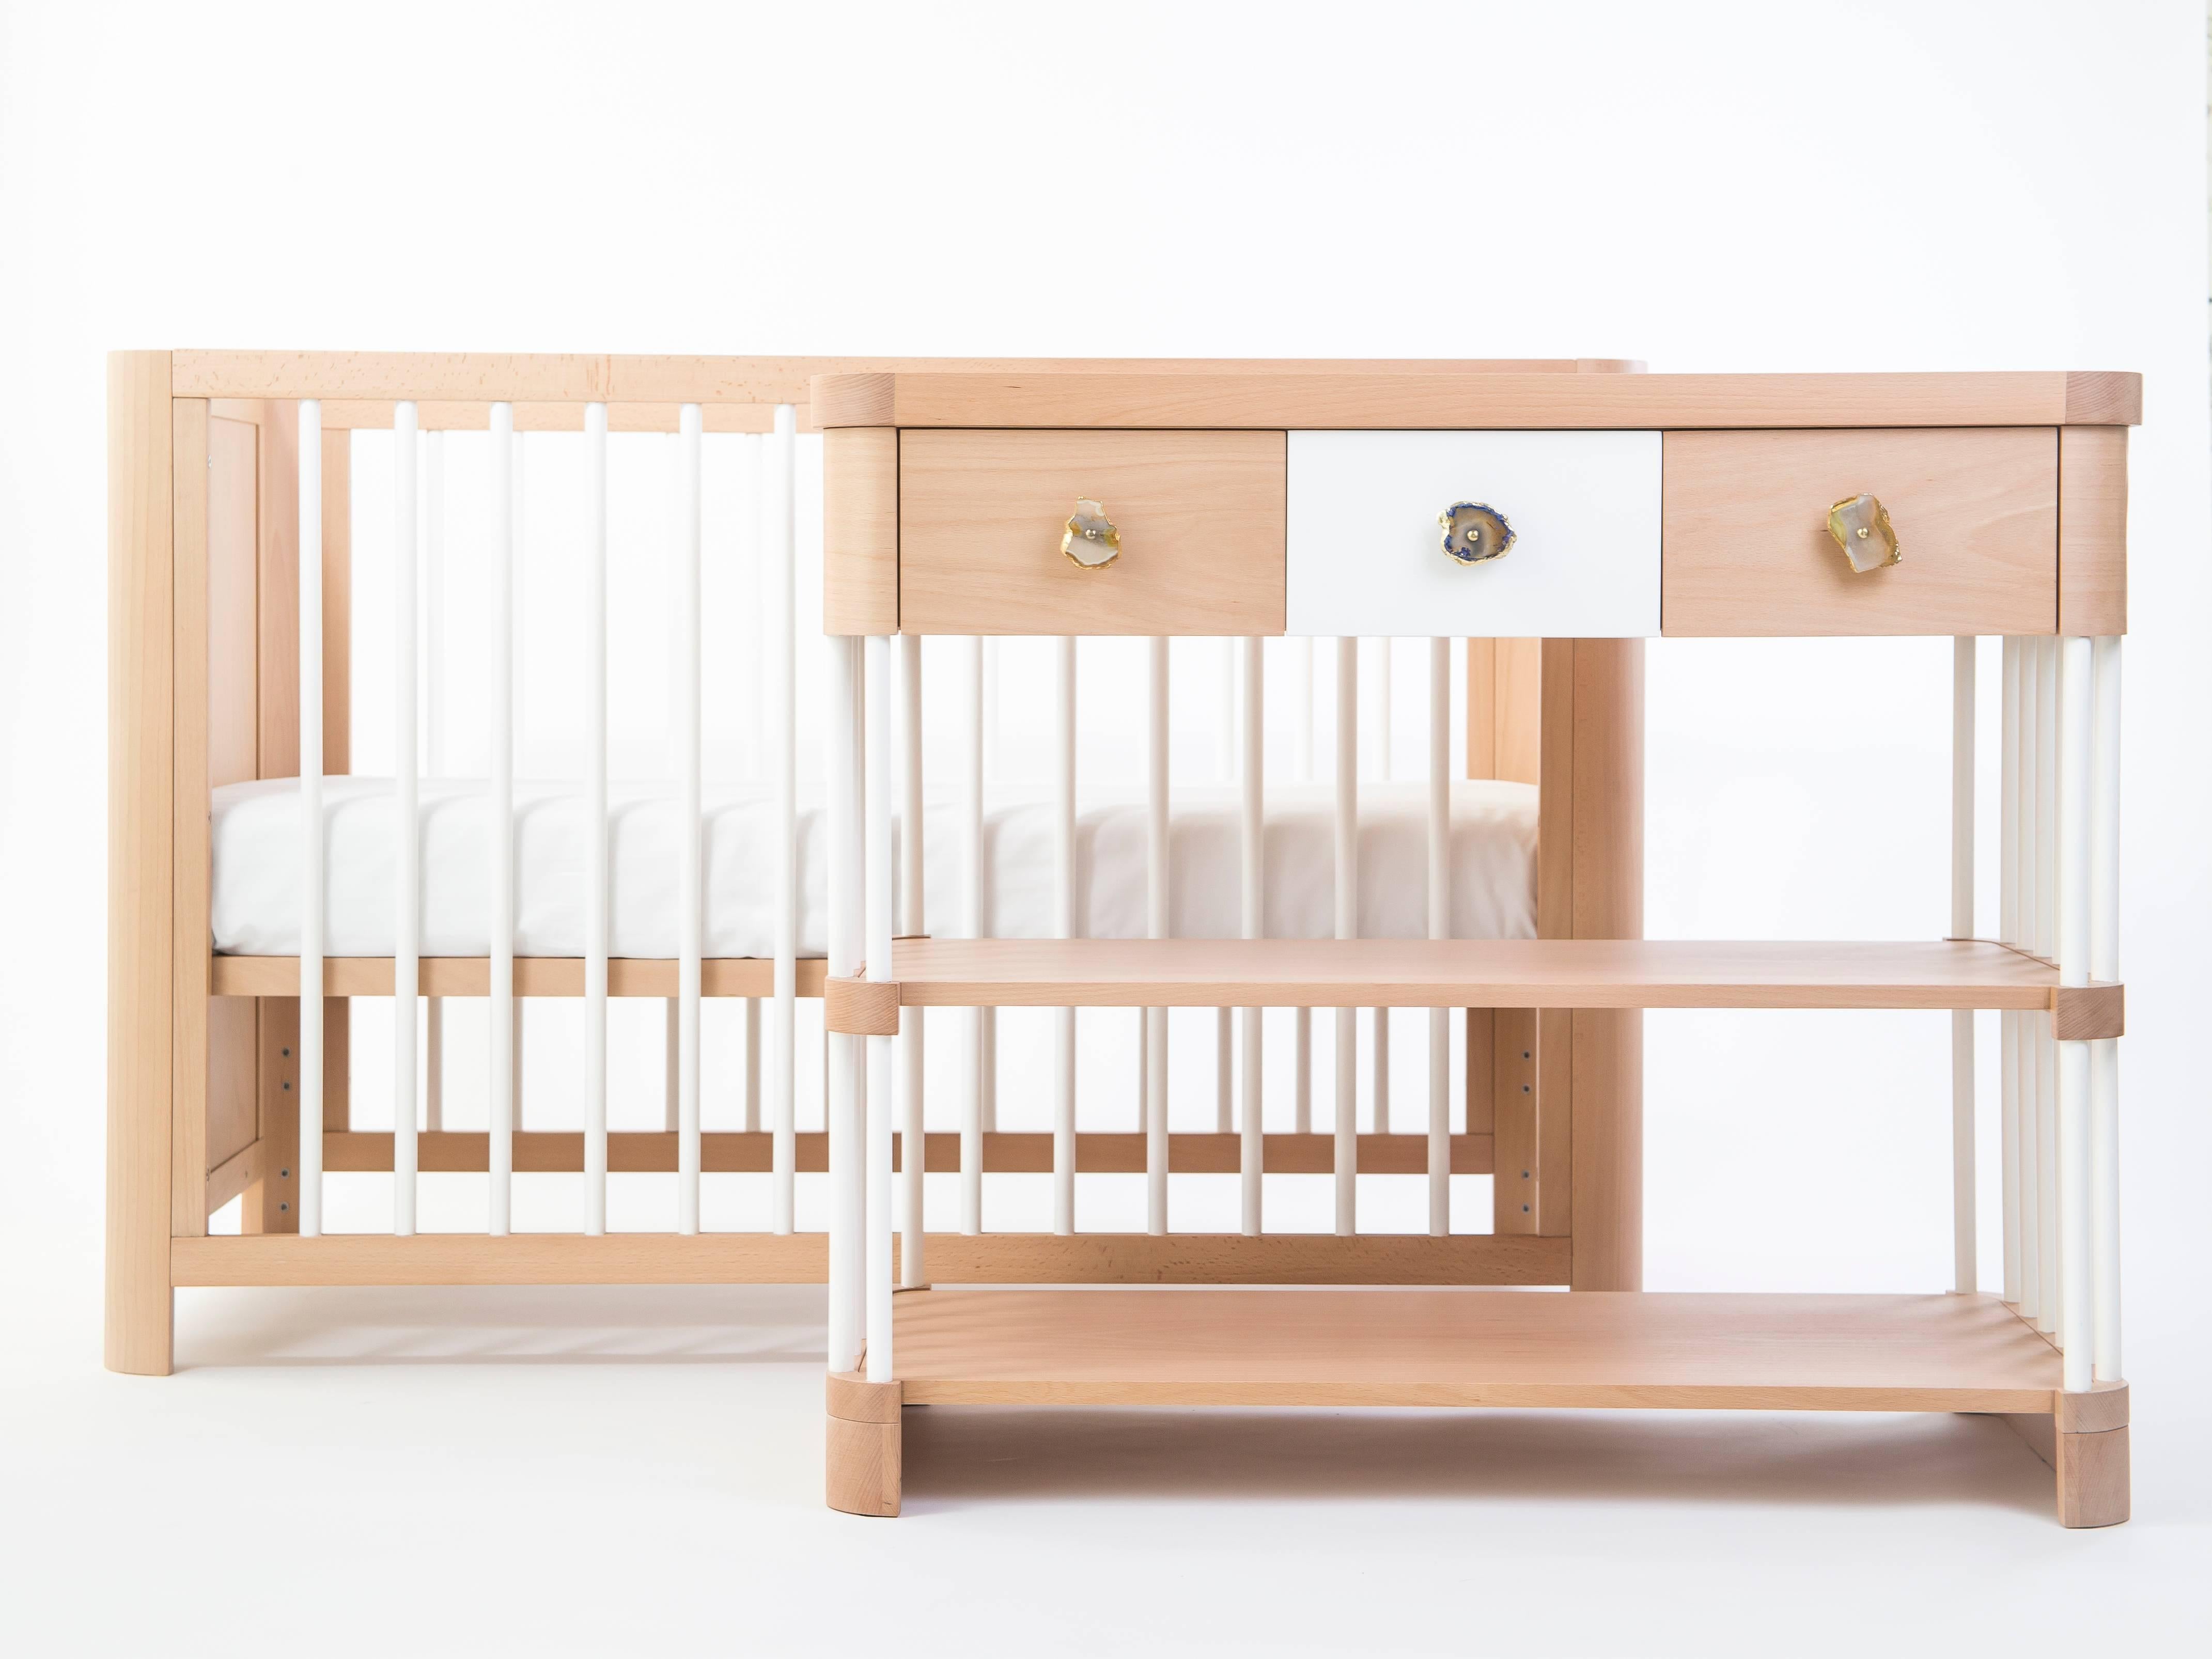 A changing table that provides safe harbor for baby while you sooth, change, massage, play and bond. There is ample room for baby to grow, and you to tend to them without bending. The table converts to become a desk, entryway console, or a set of